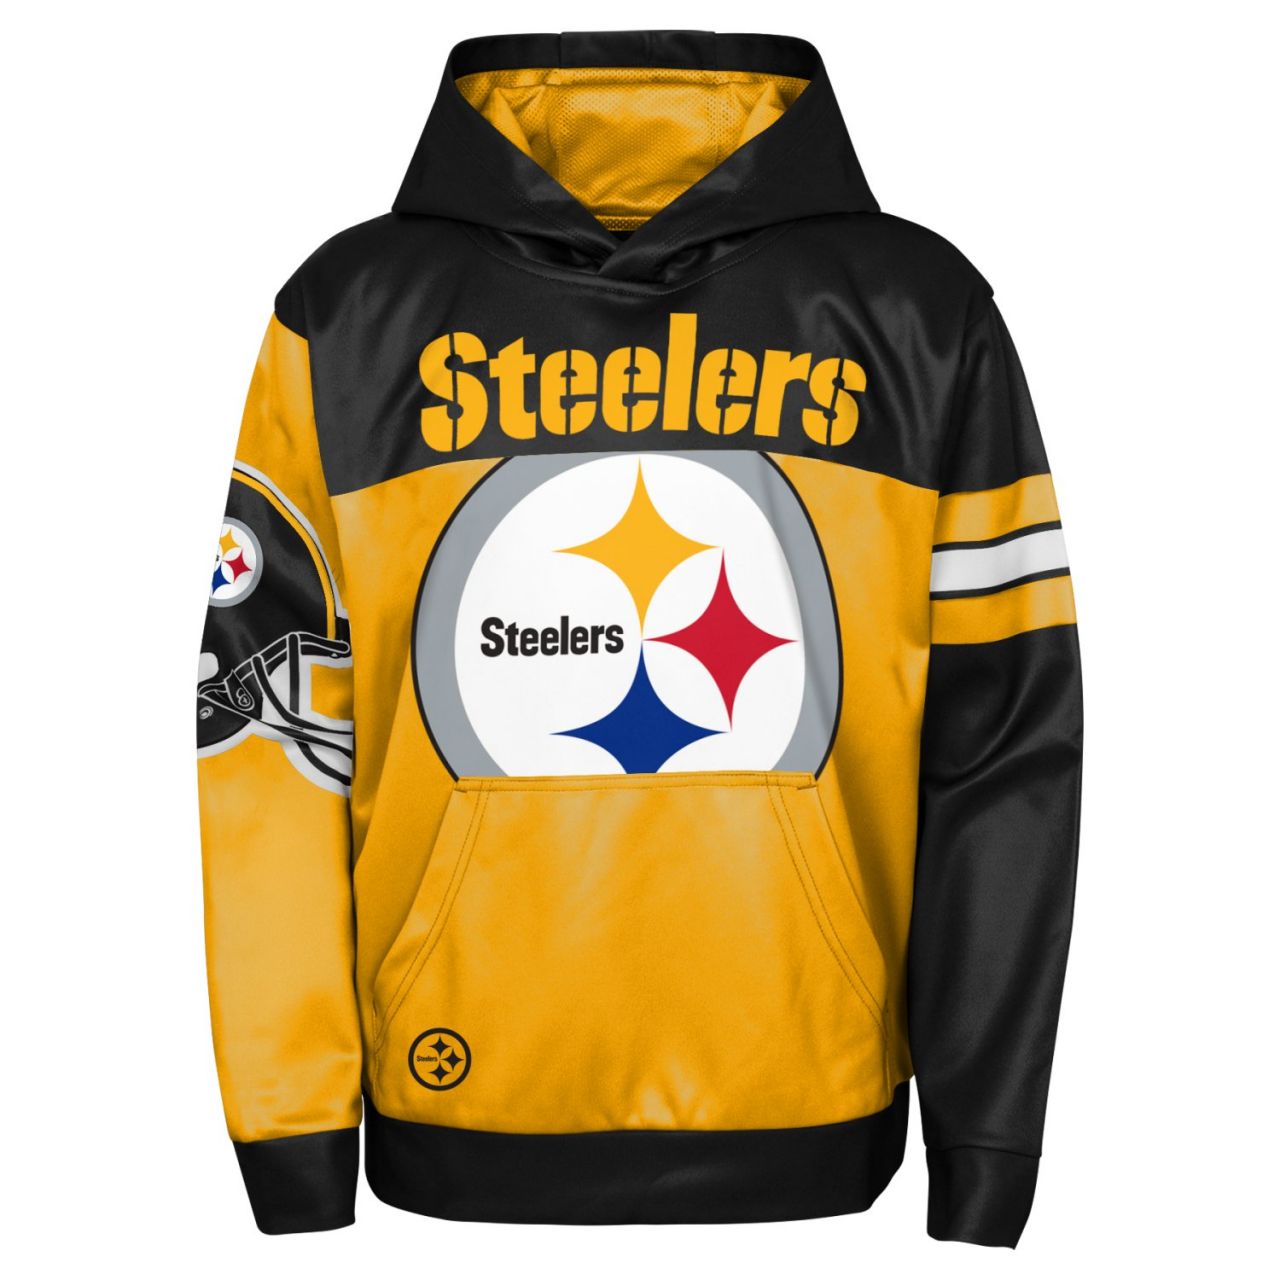 Kinder NFL Sublimated Hoody - GOAL Pittsburgh Steelers von Outerstuff